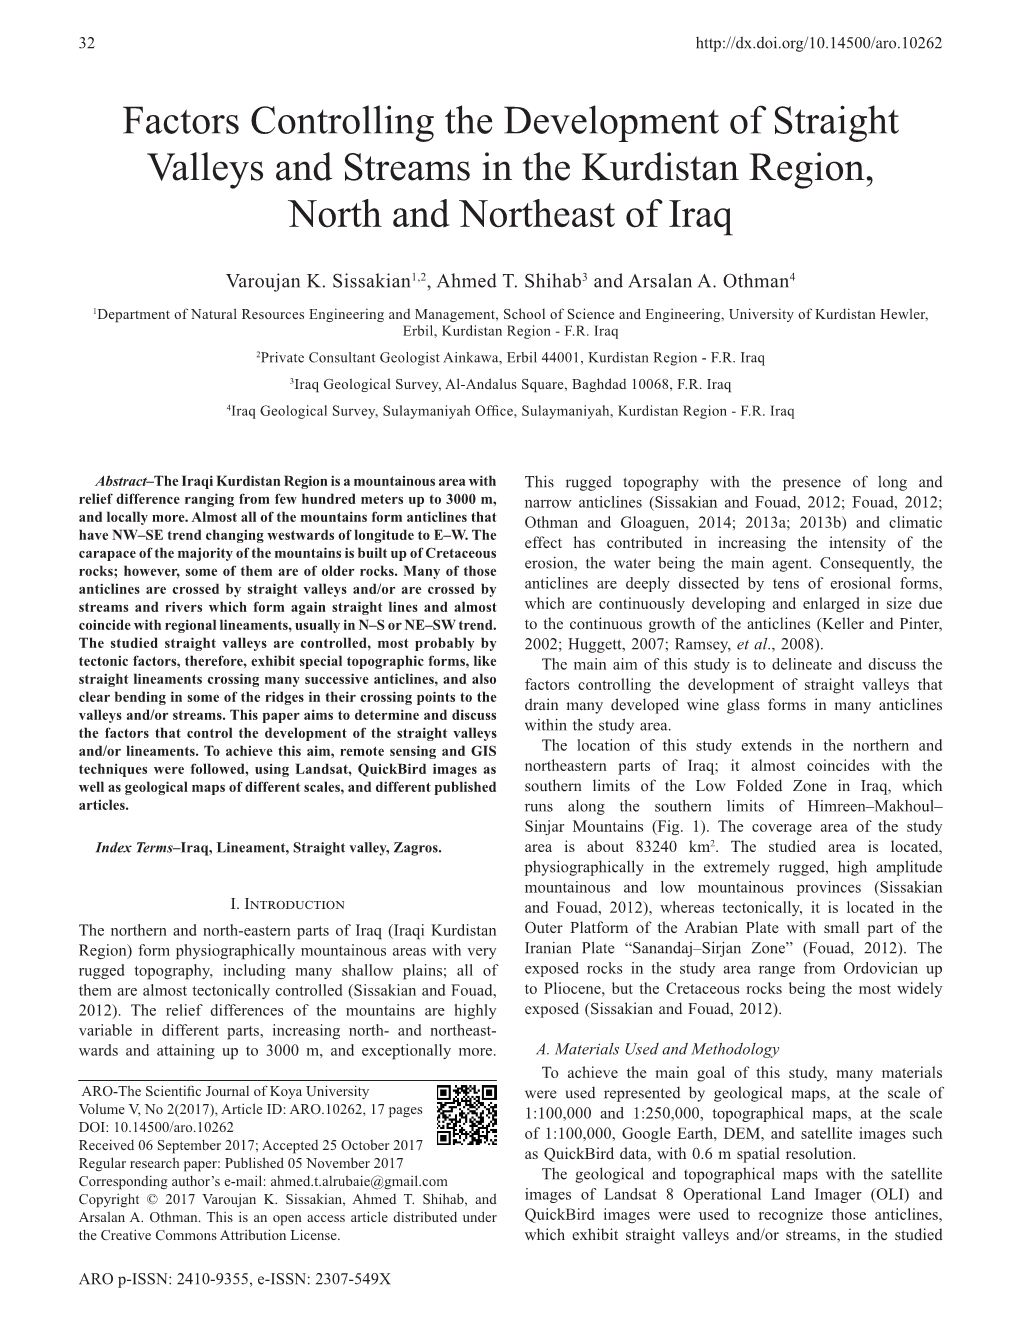 Factors Controlling the Development of Straight Valleys and Streams in the Kurdistan Region, North and Northeast of Iraq